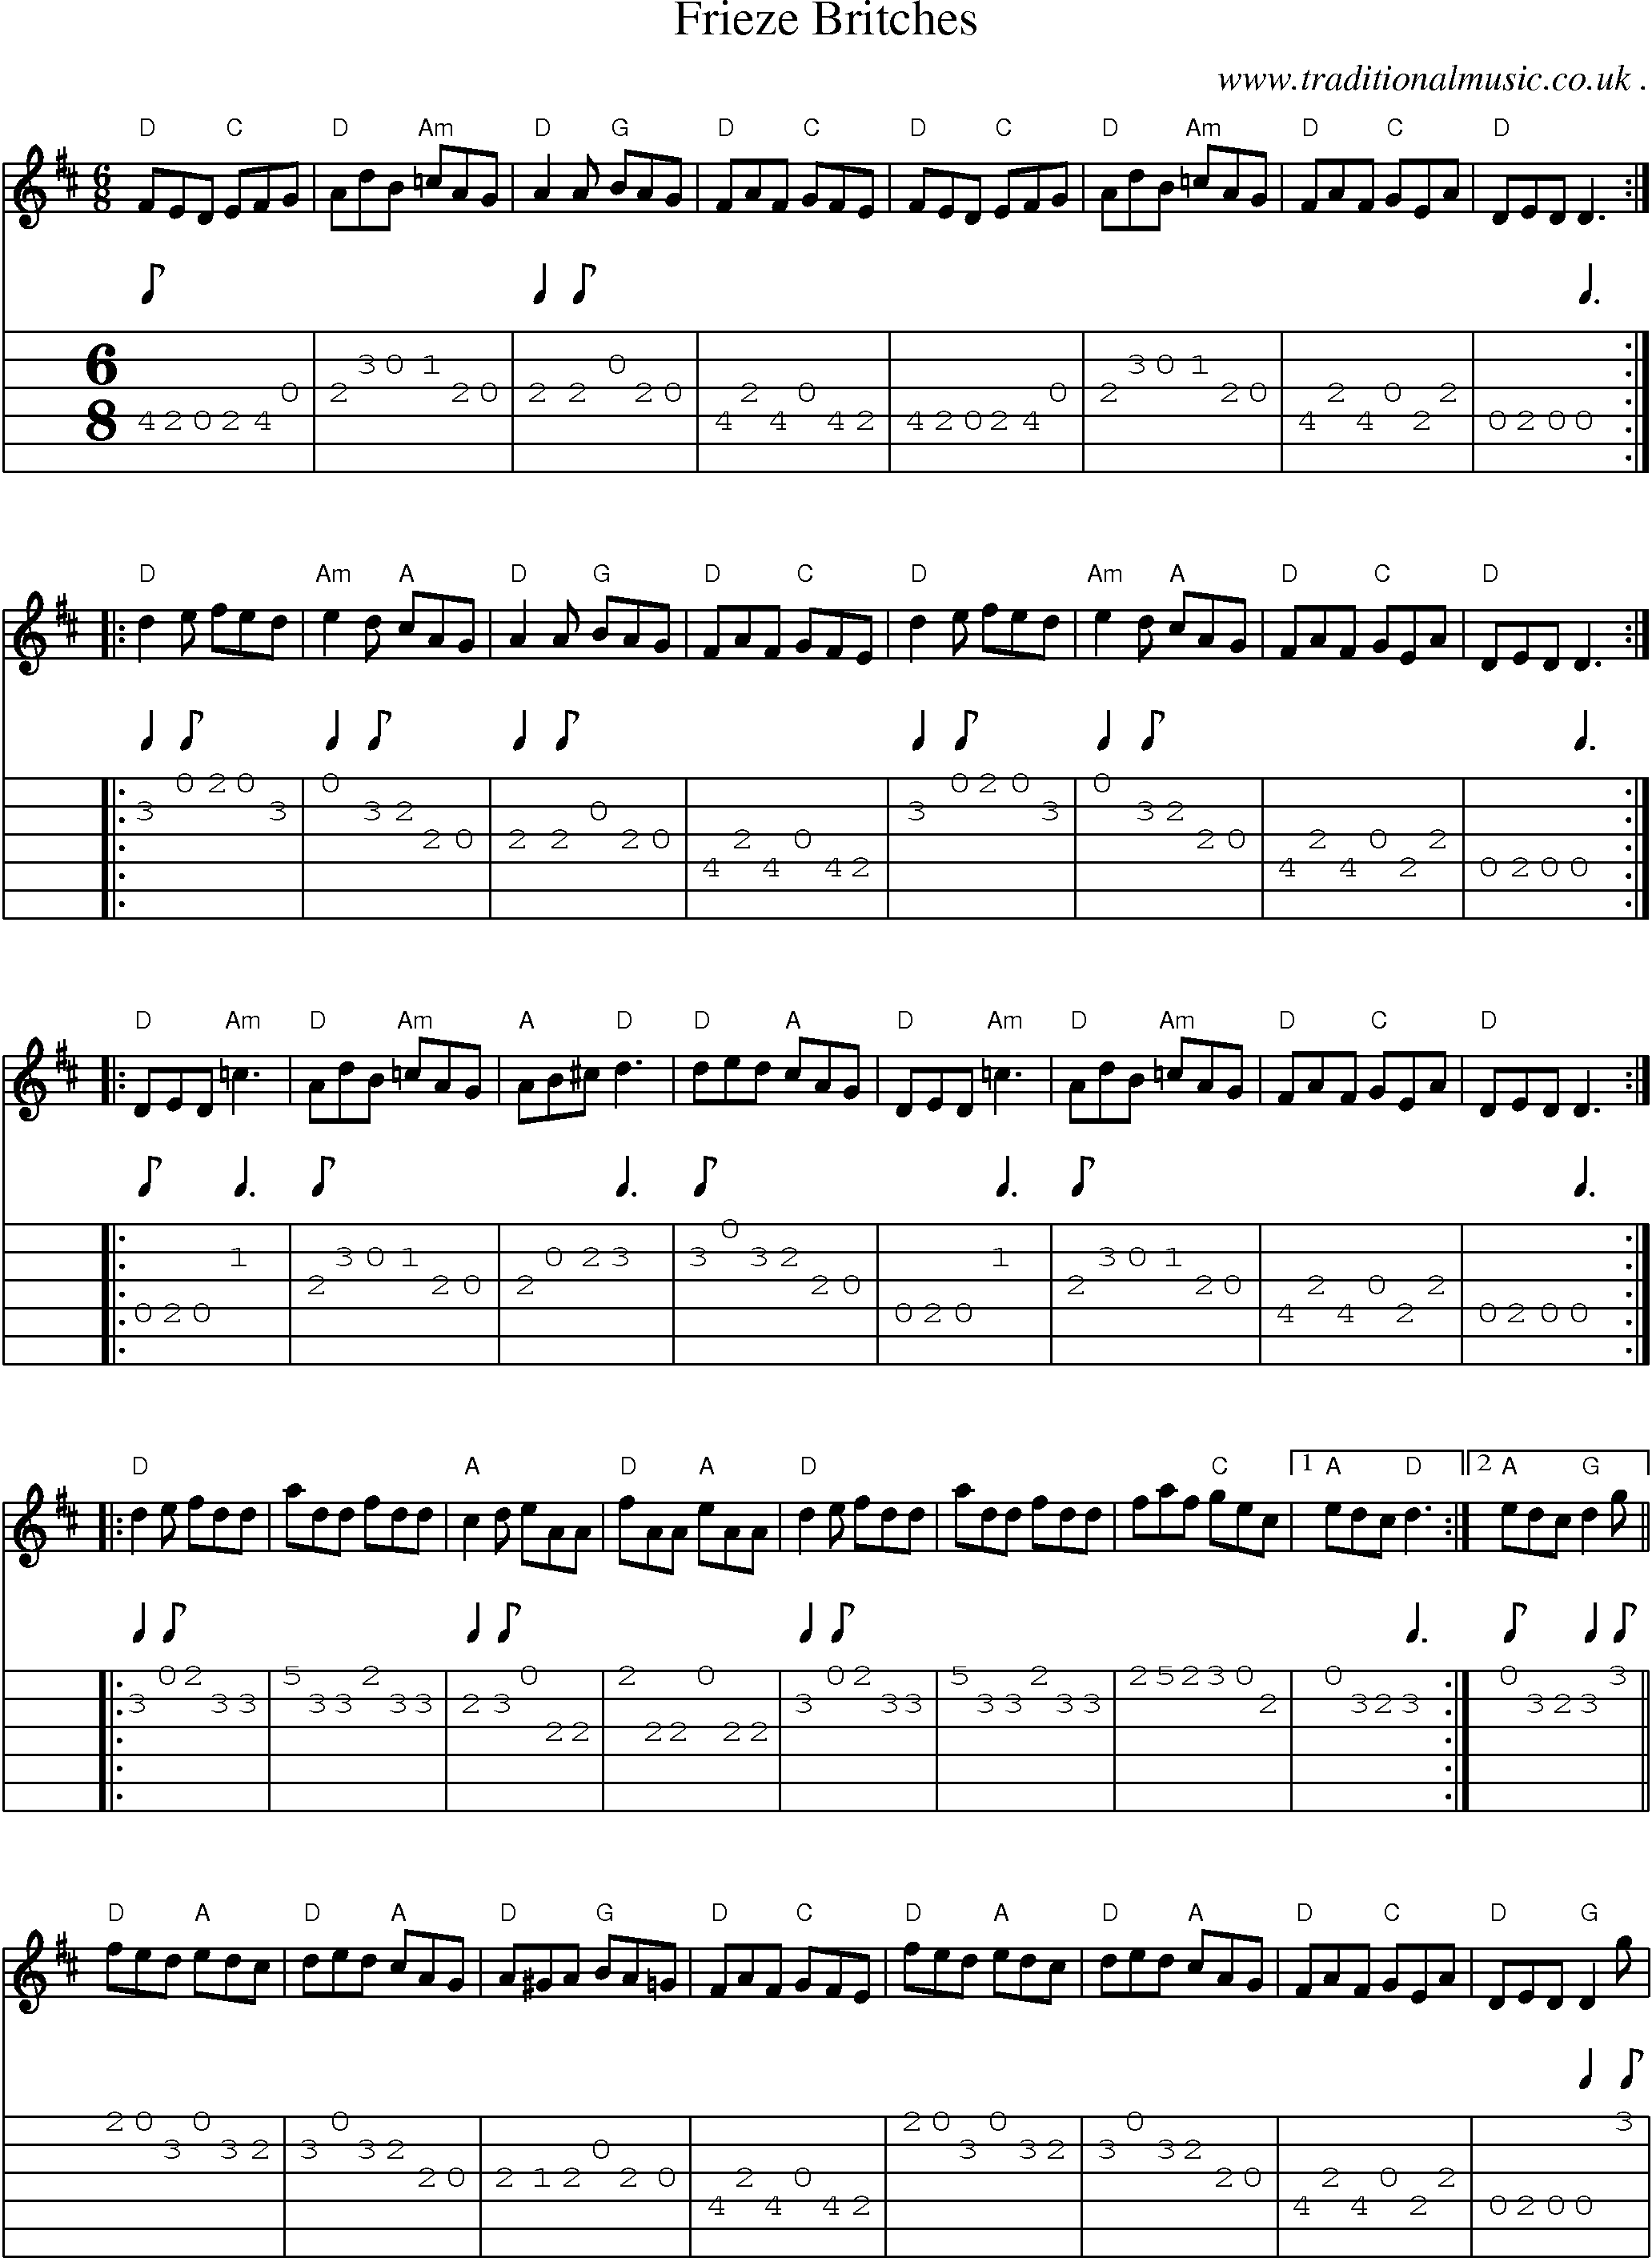 Music Score and Guitar Tabs for Frieze Britches